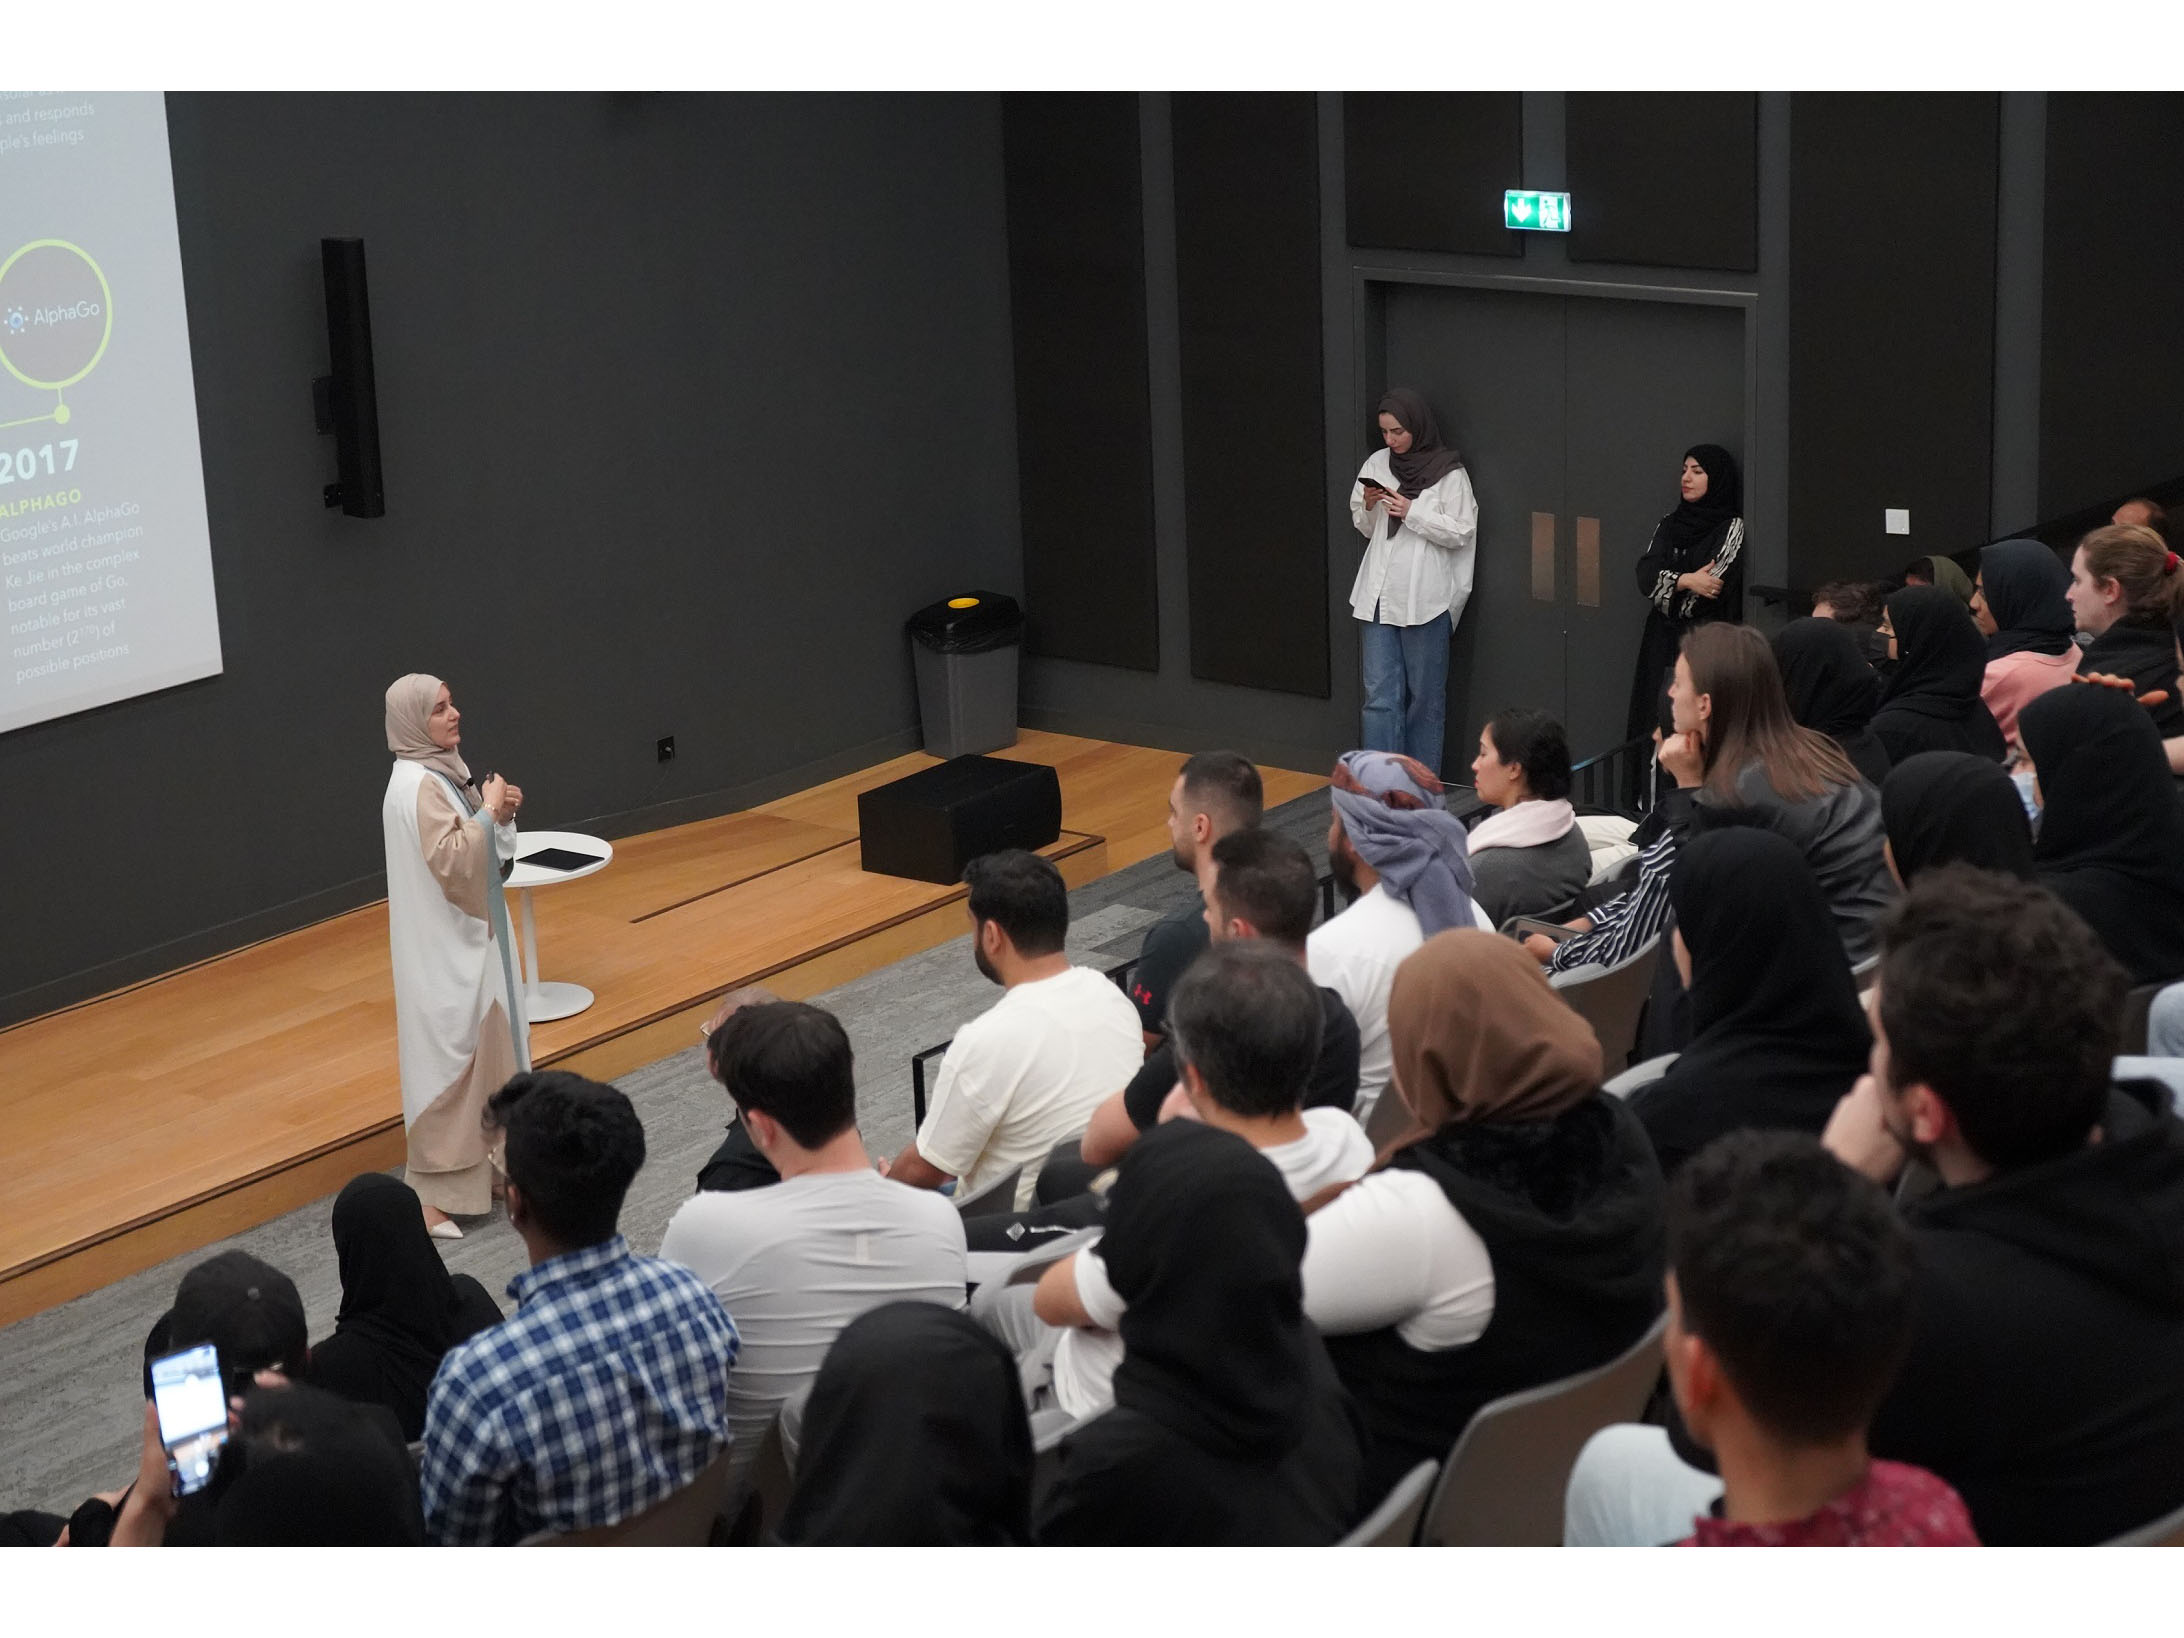 42 Abu Dhabi hosts AI workshop with over 1000 virtual attendees